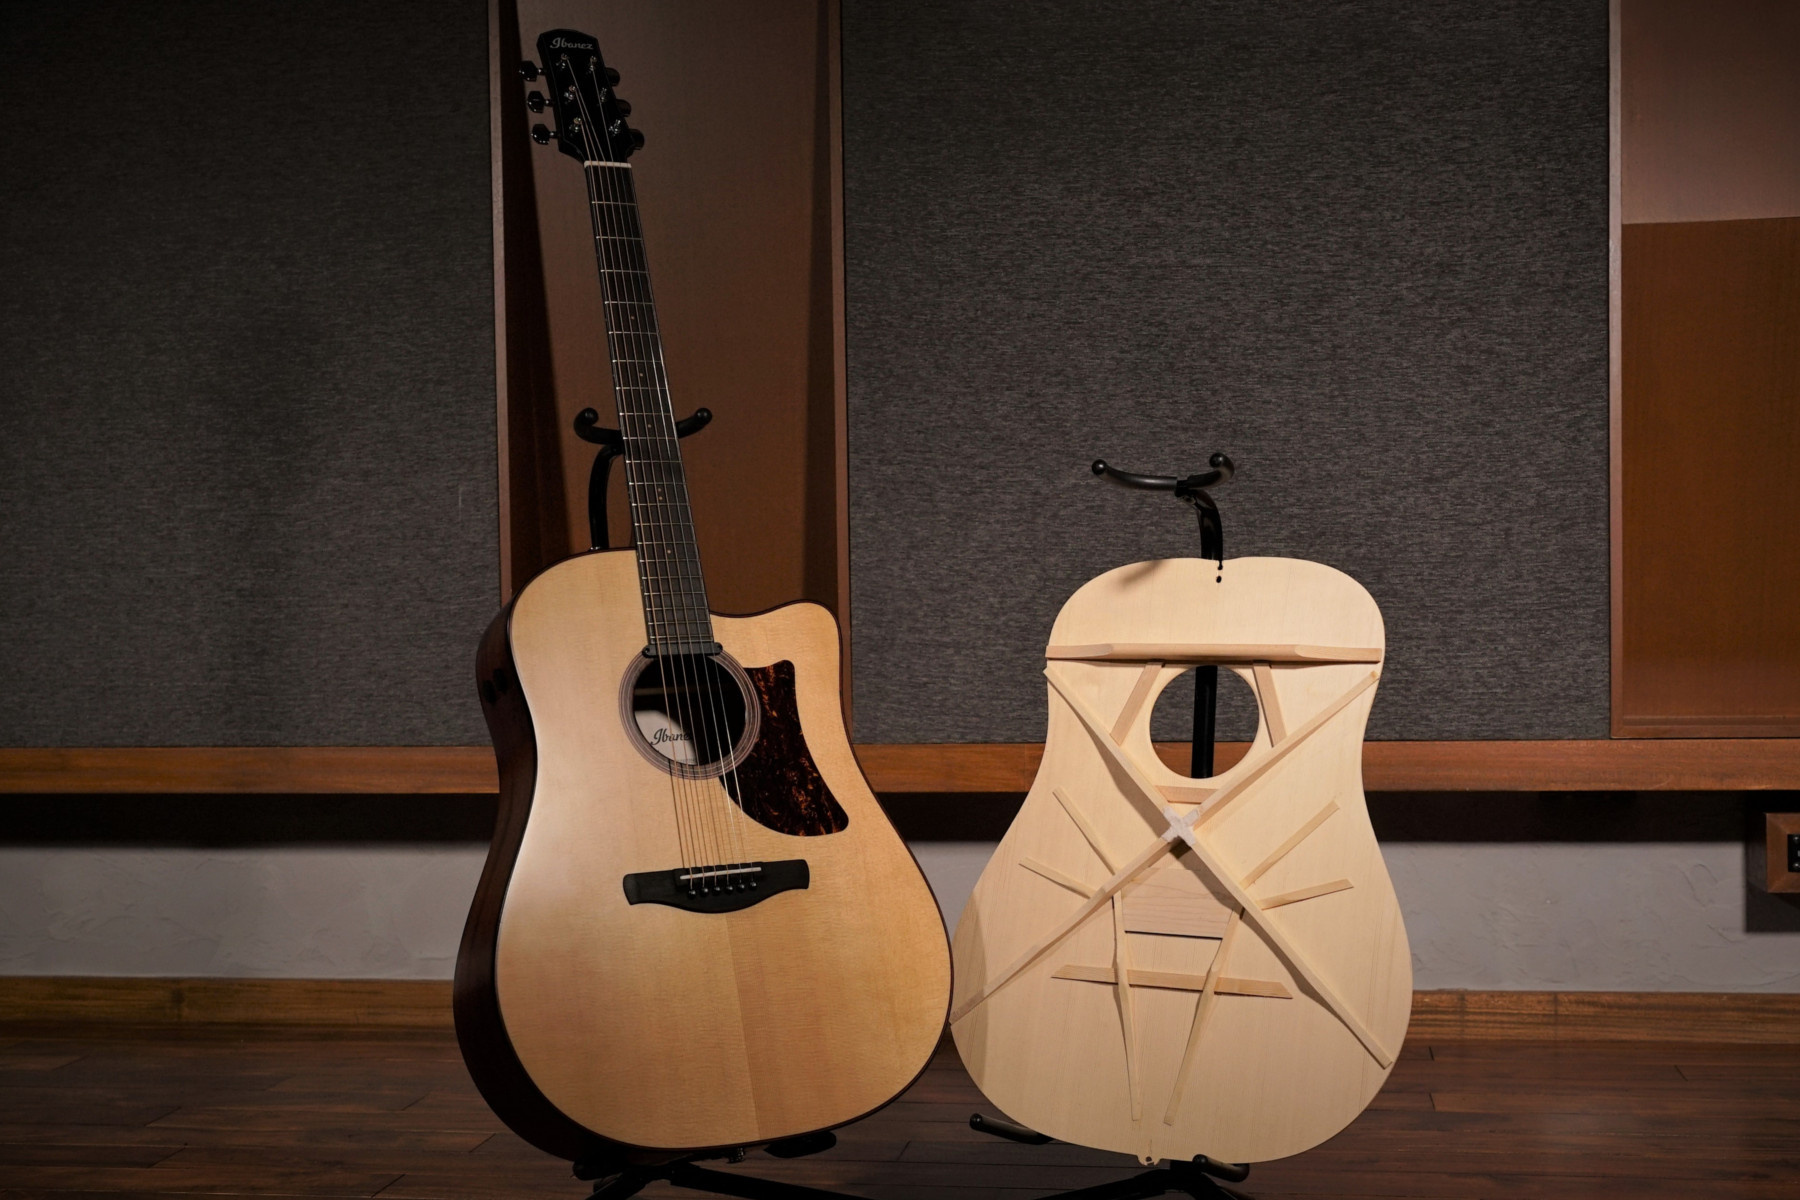 Advanced Acoustic Dreadnought “AAD”